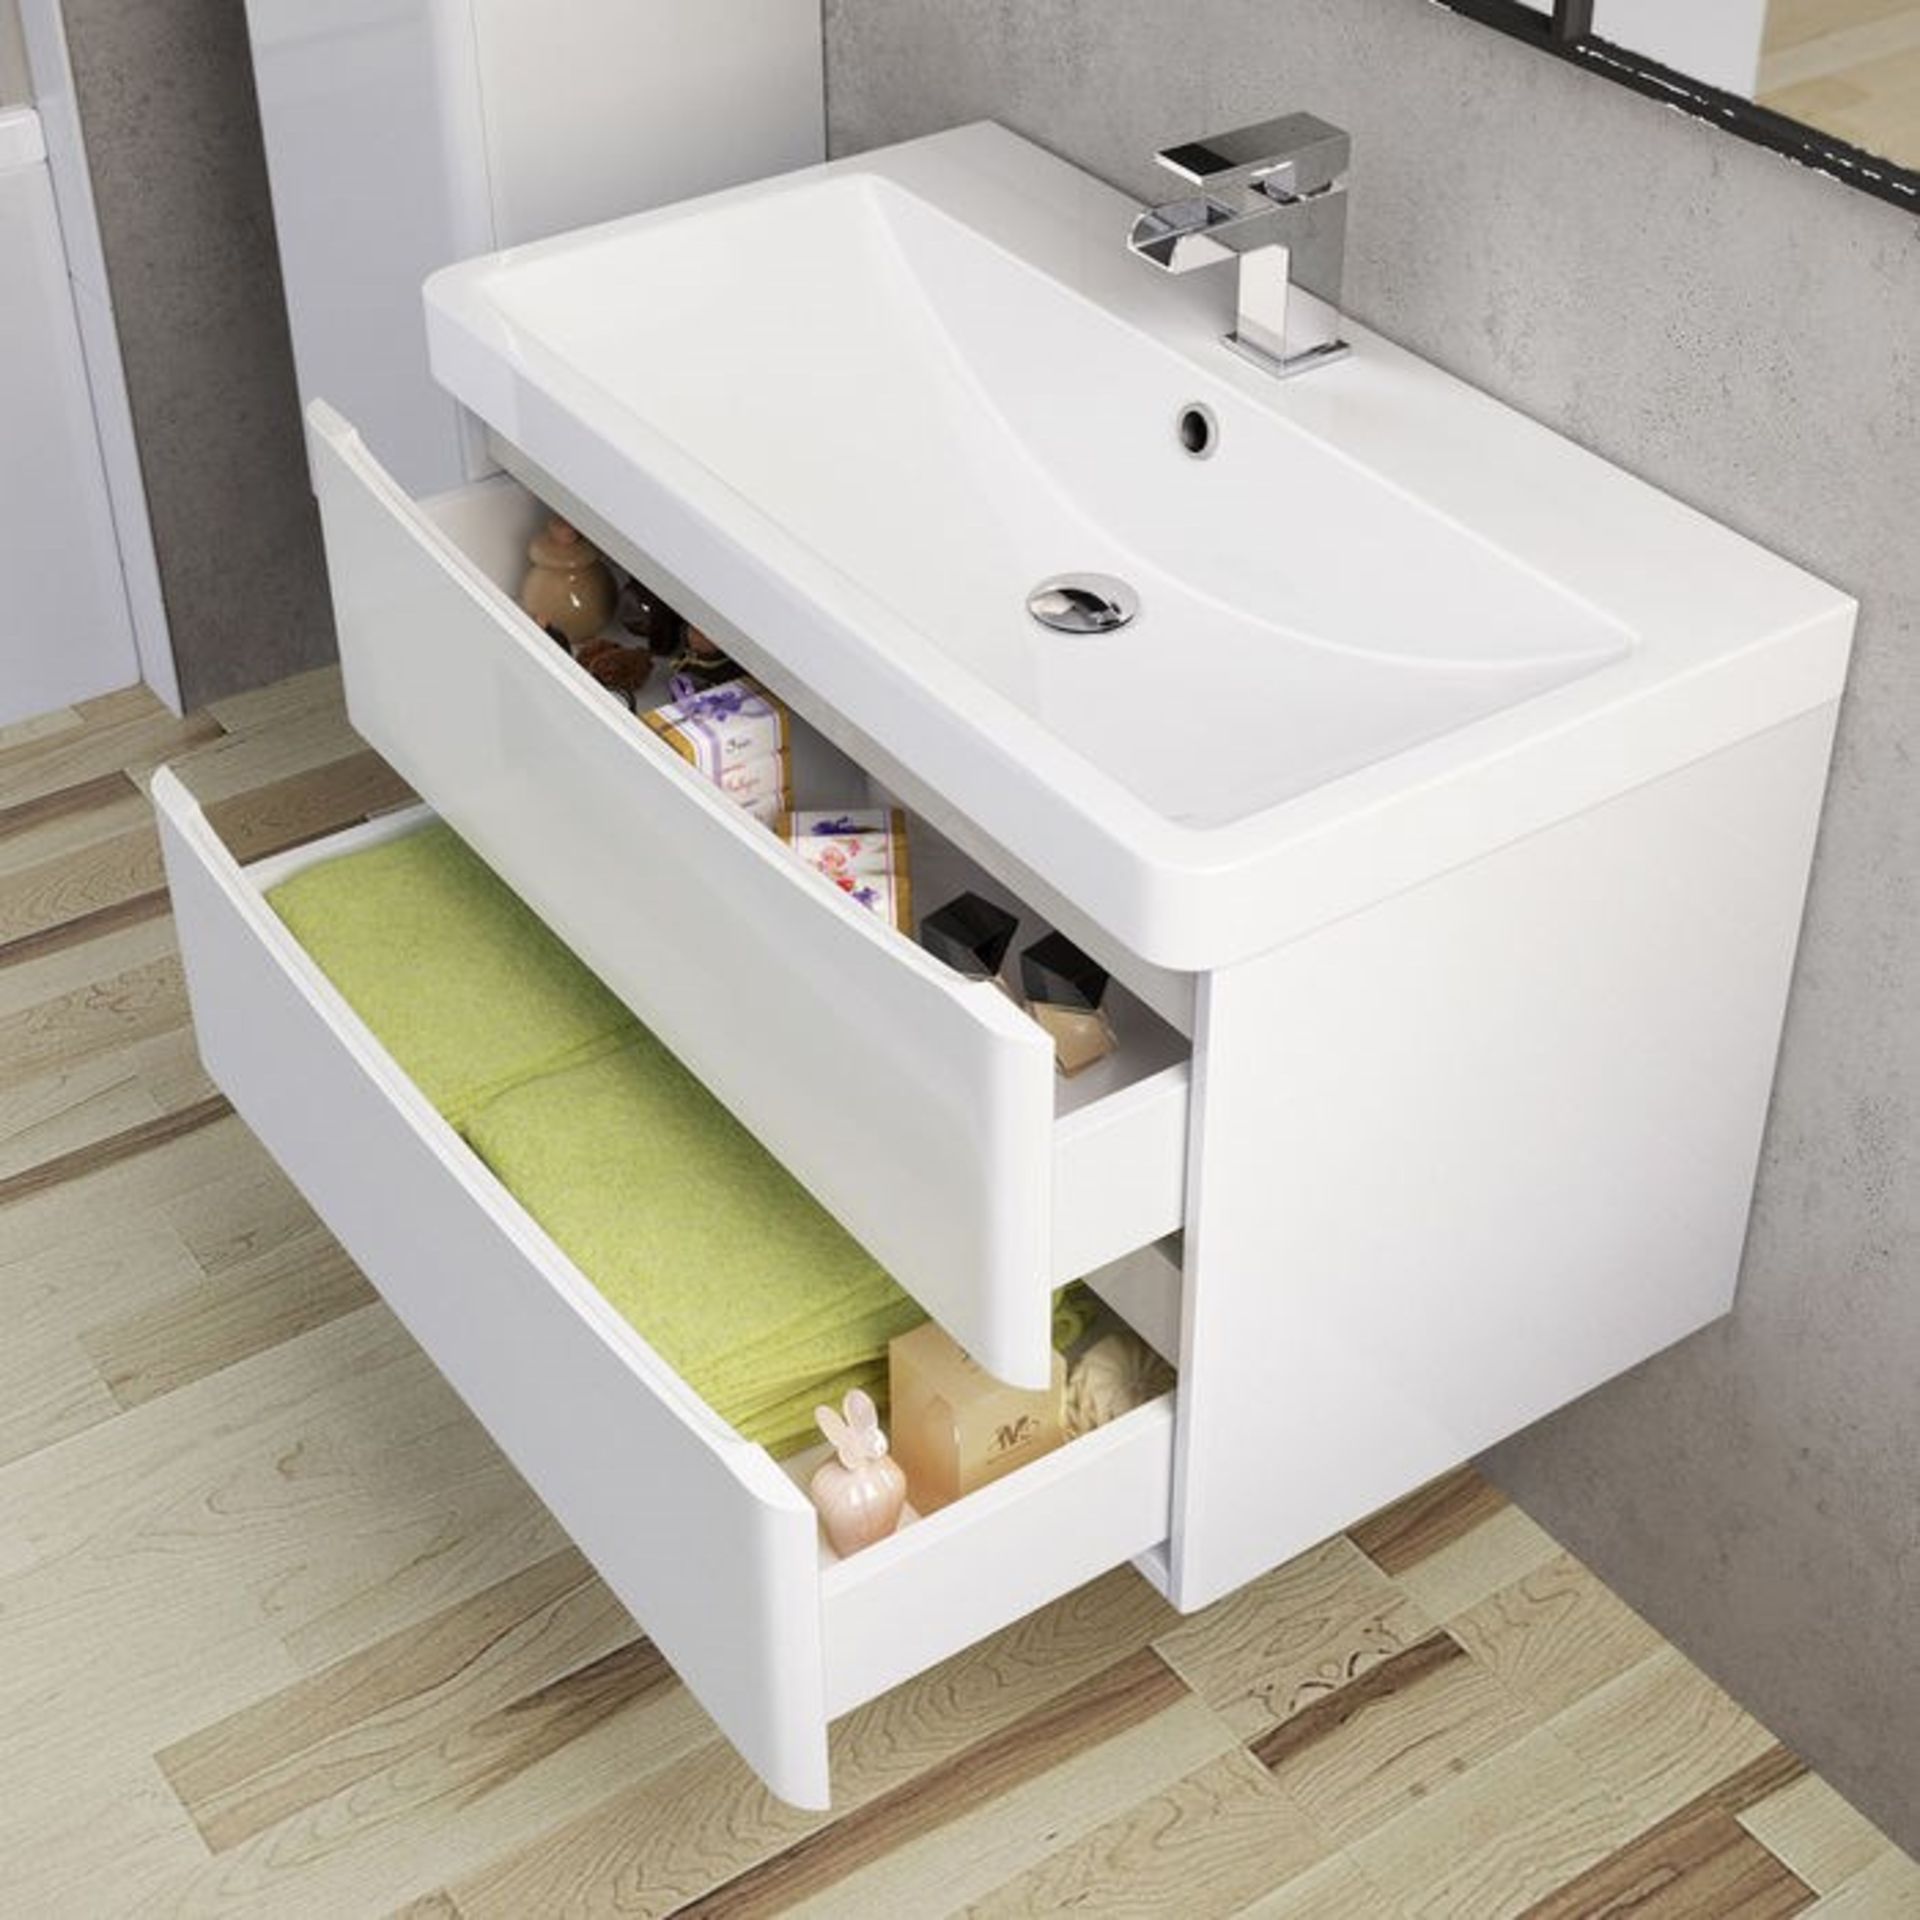 (CP11) 1000mm Austin II Gloss White Built In Basin Drawer Unit - Wall Hung. RRP £499.99. Comes... - Image 2 of 4